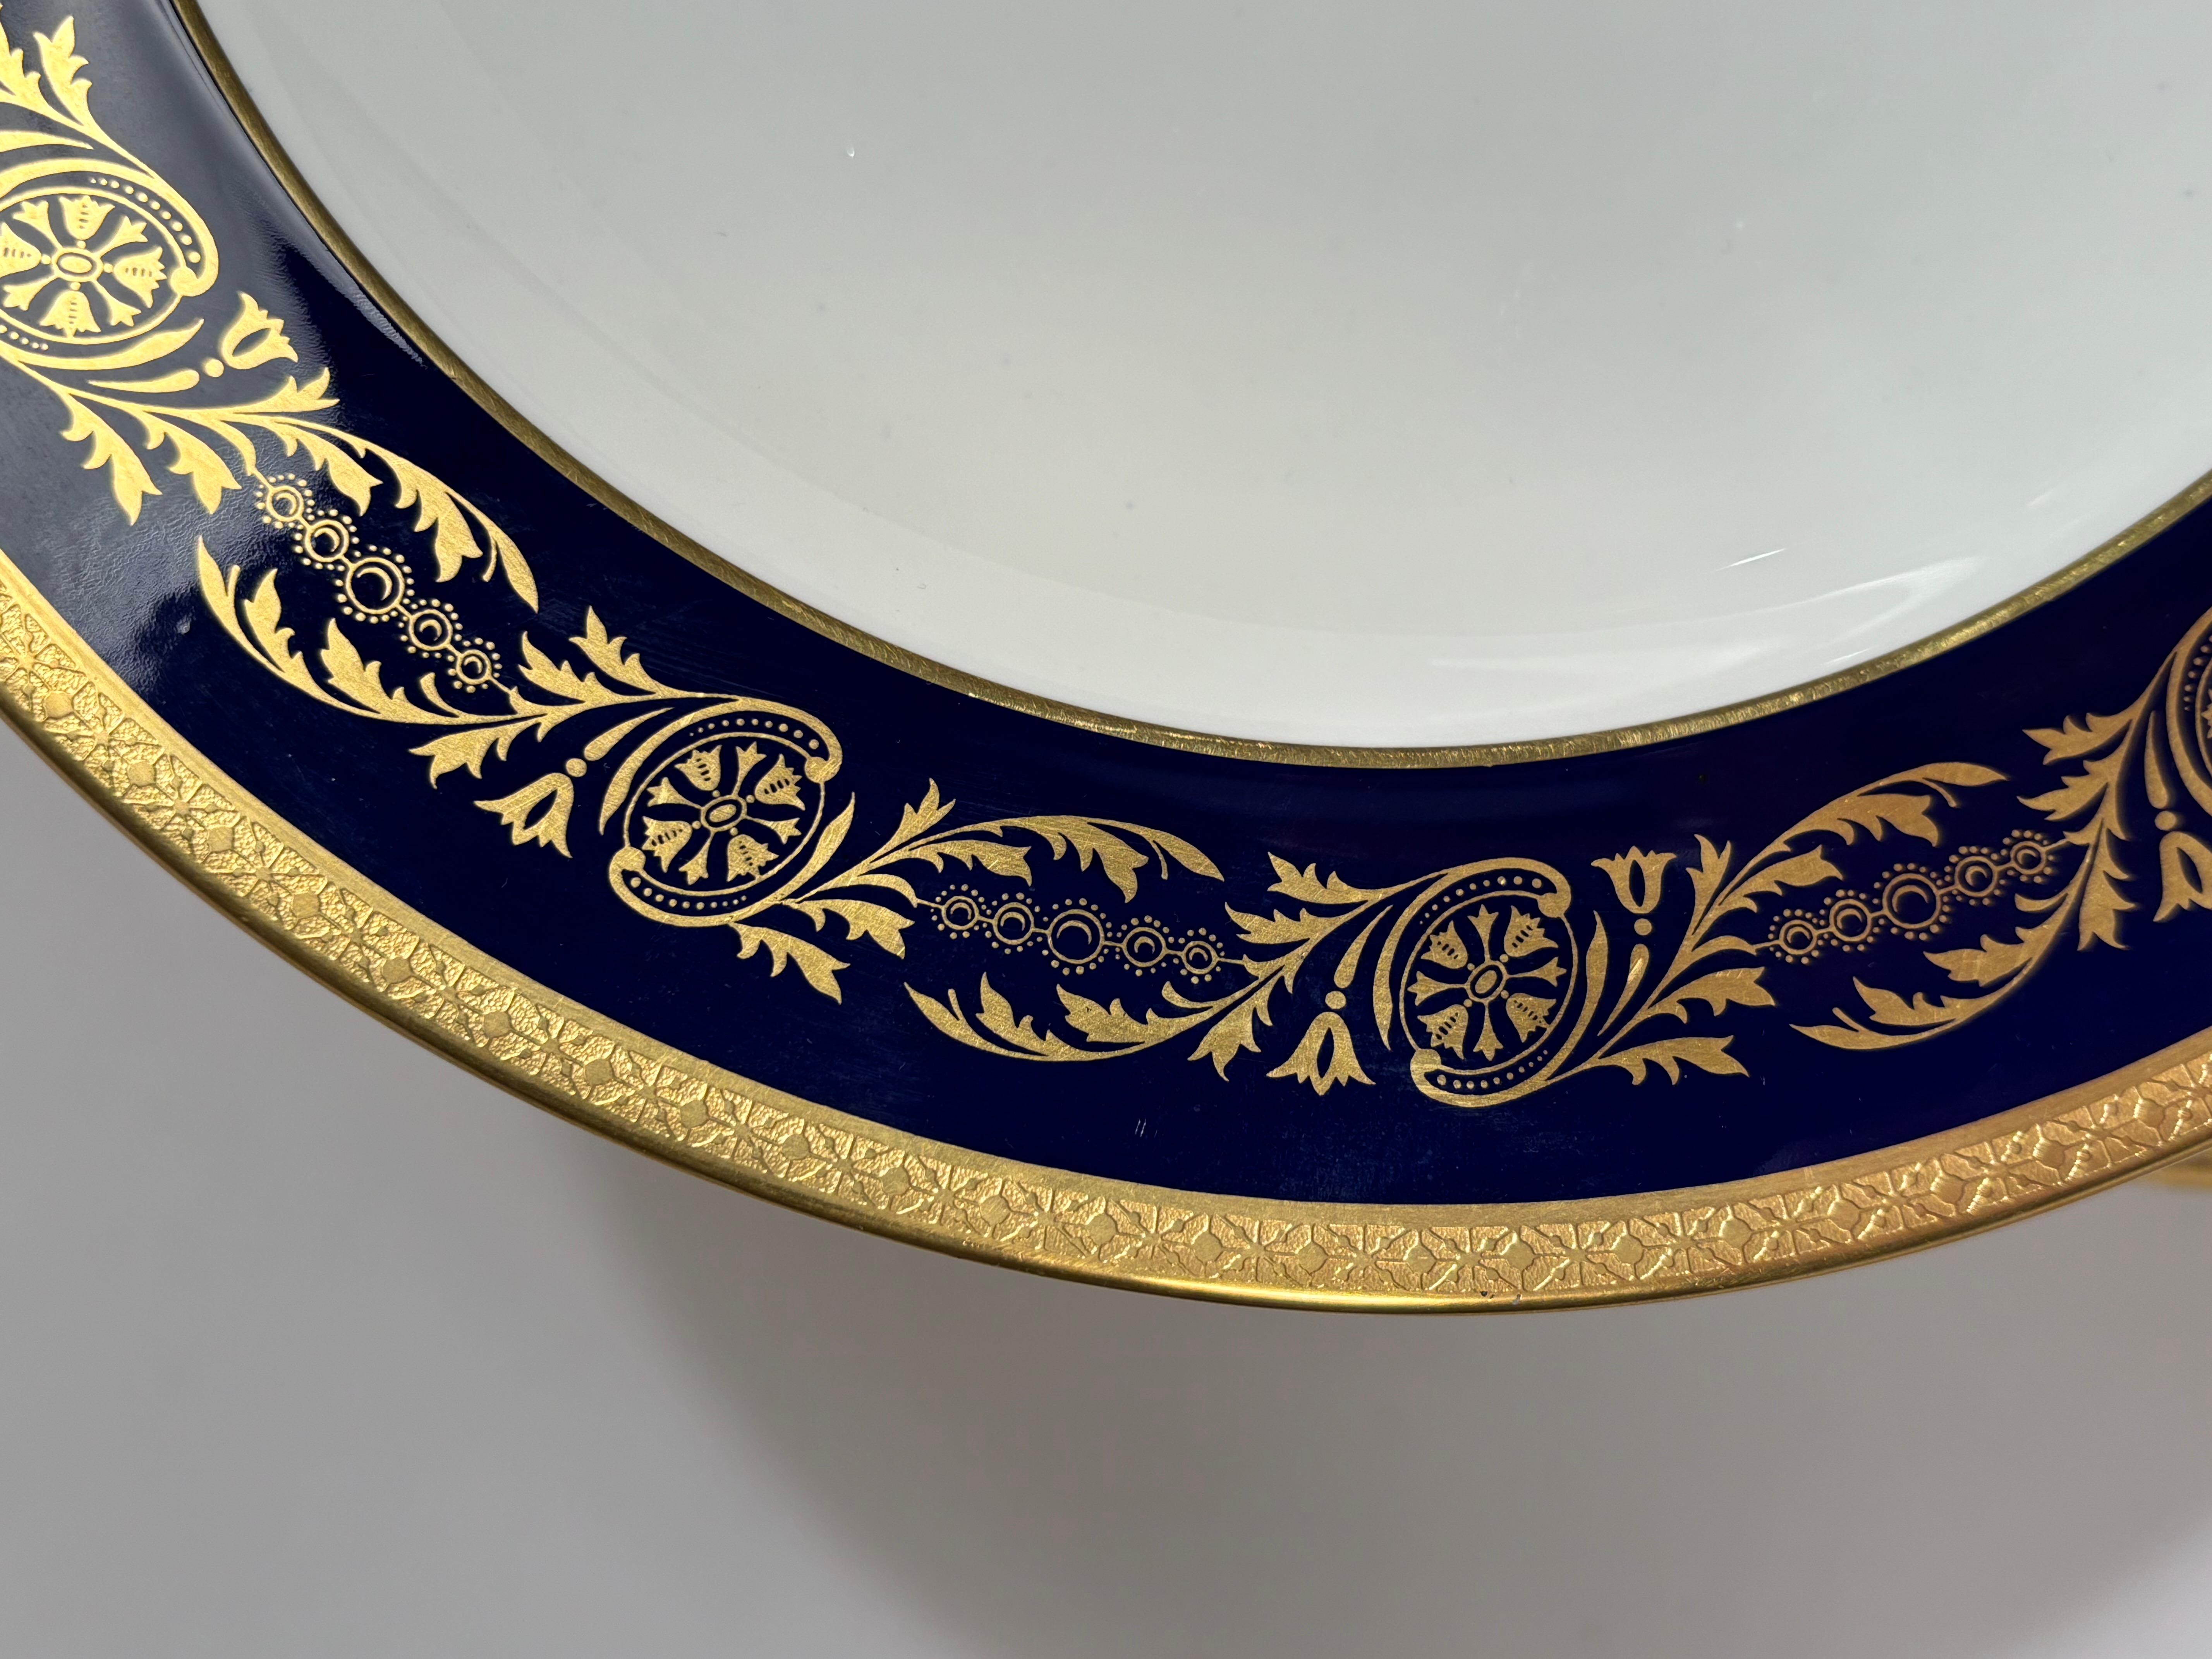 From one of England's re known porcelain factories, Coalport, we have a set of 10 rimmed soup bowls. They feature a nice collar of cobalt blue and gold design . They are perfect for soup, salad, risotto, desserts with sauce and so much more. The